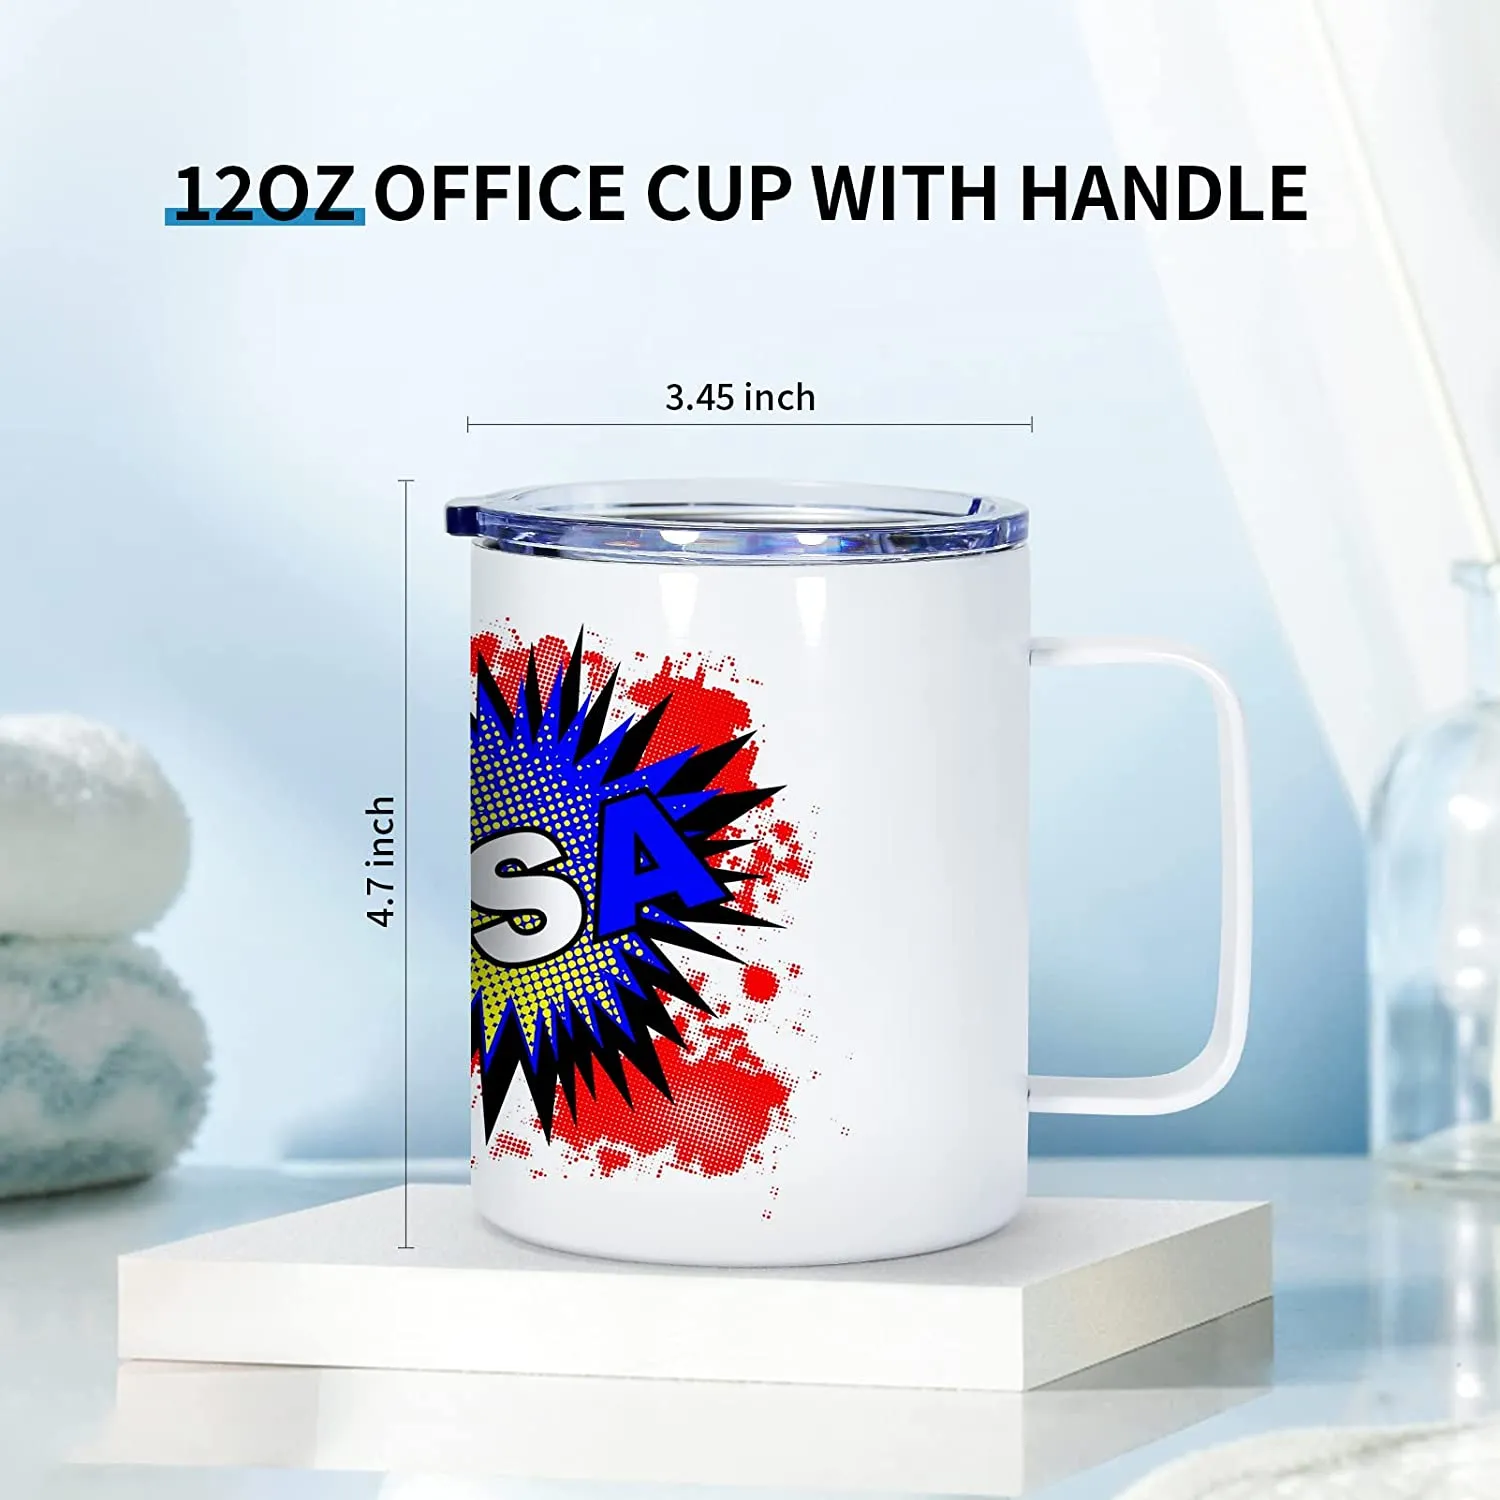 Stainless Steel Sublimation Stanley Mug Blanks With Handle And Sliding Lid  Coating 12 Oz Capacity For Cricut Stanley Mug Press Machine 04227025328  From U4qf, $5.75